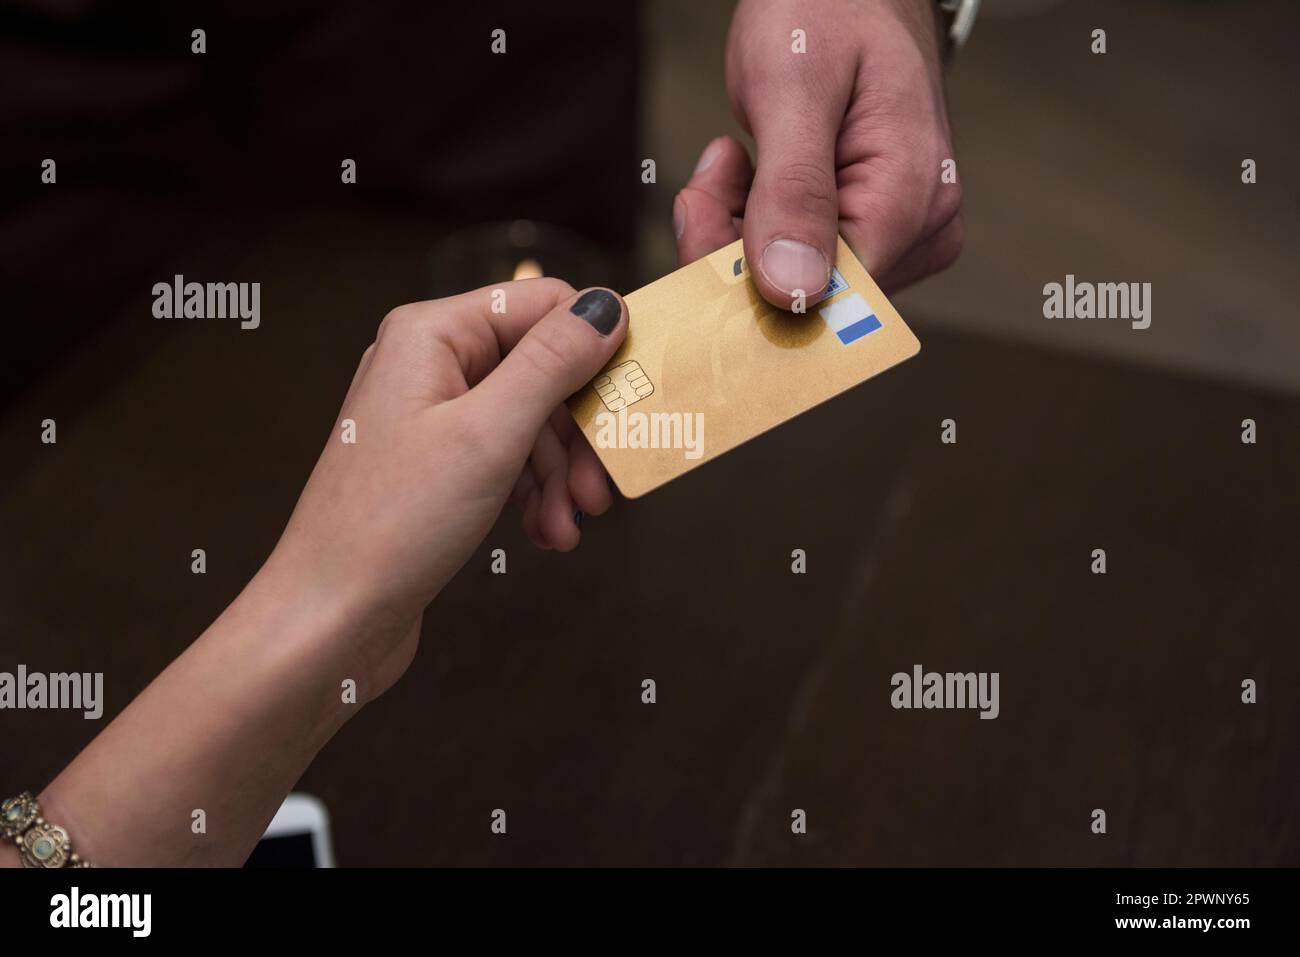 Cropped image of hands holding credit card at restaurant Stock Photo